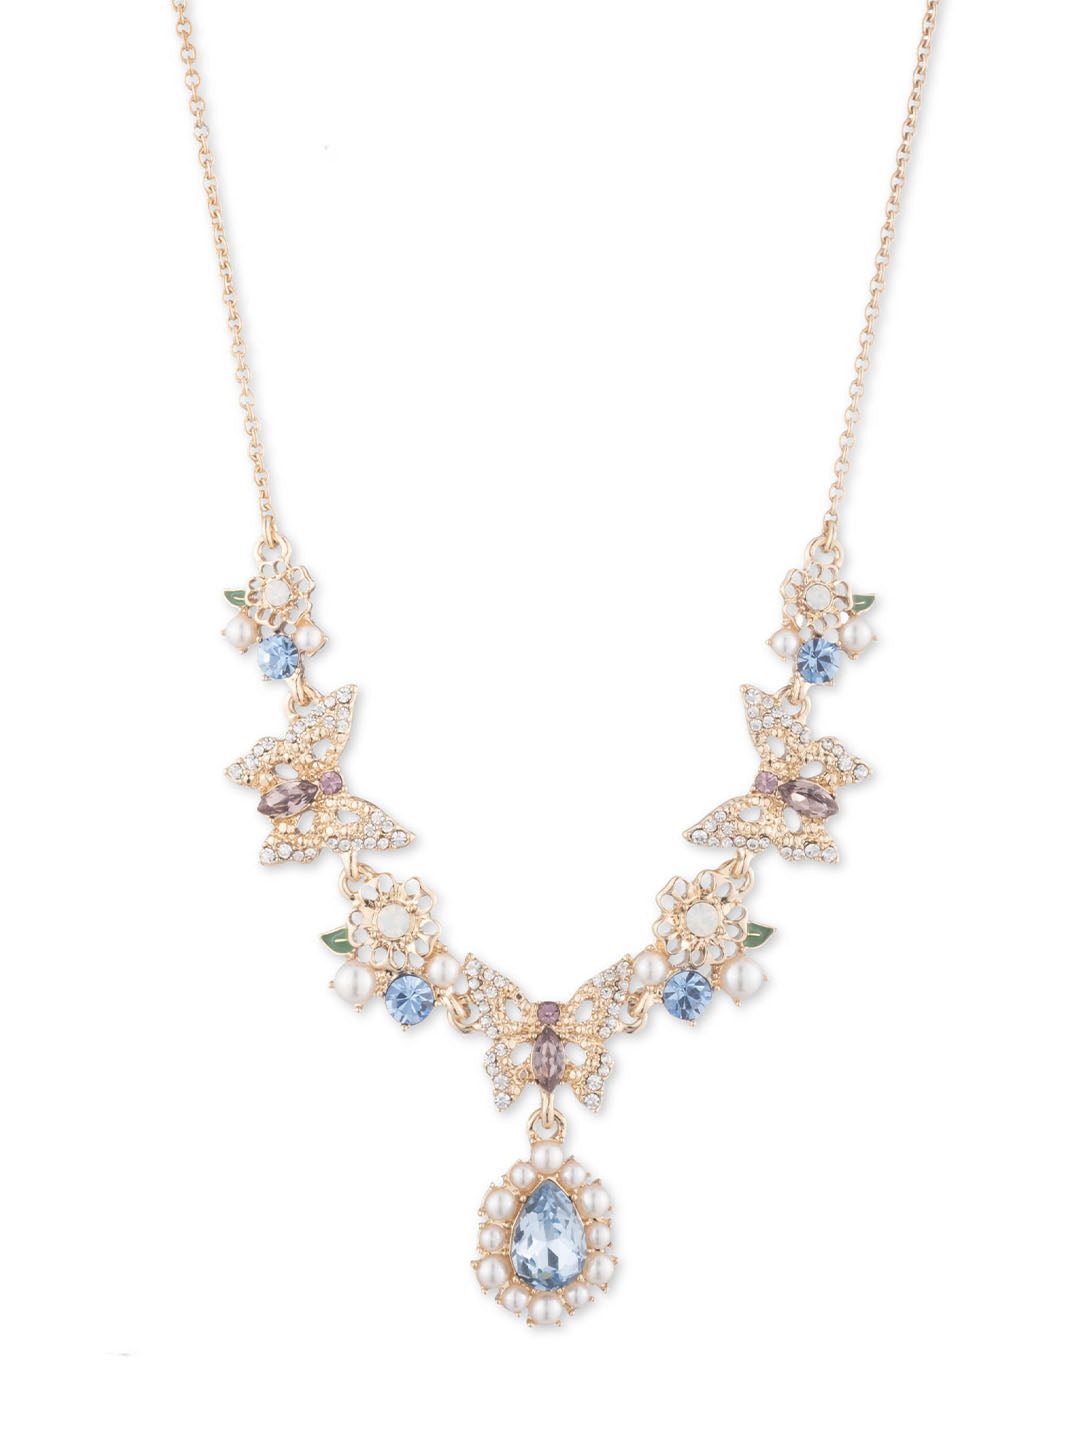 Butterfly Necklace | Marchesa